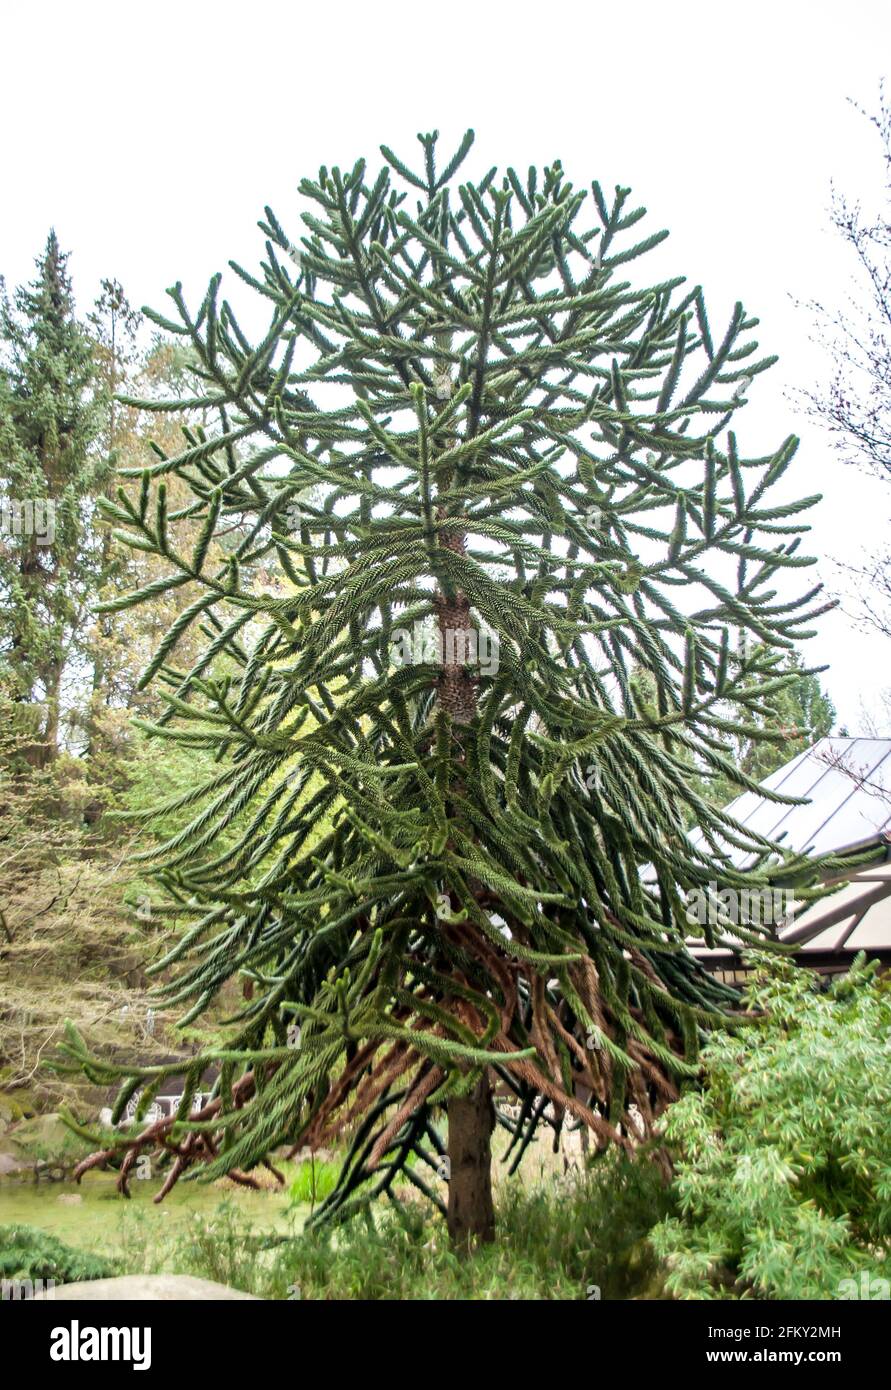 Chilean araucaria tree growing in a park in Germany Stock Photo